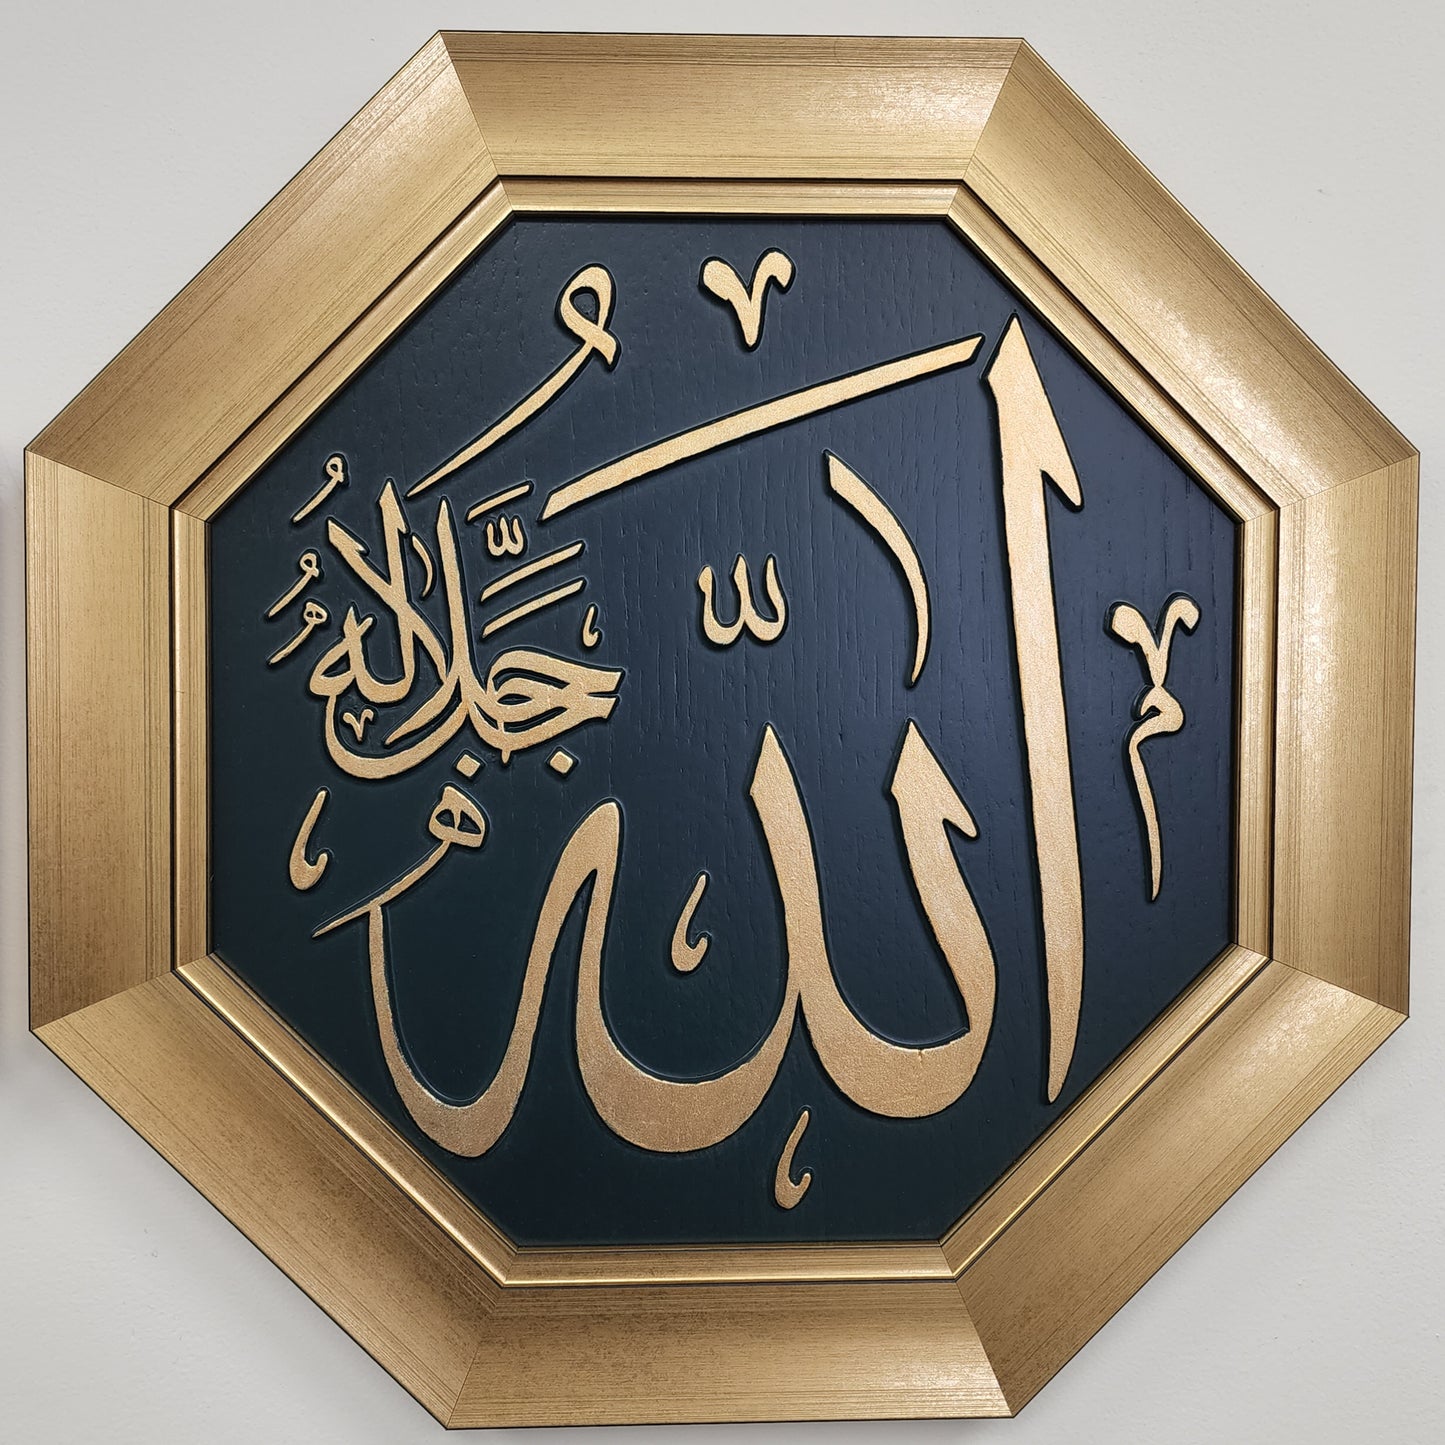 Allah & Muhammad - Set of Two - Islamic Raised Calligraphy Art Gold Painted